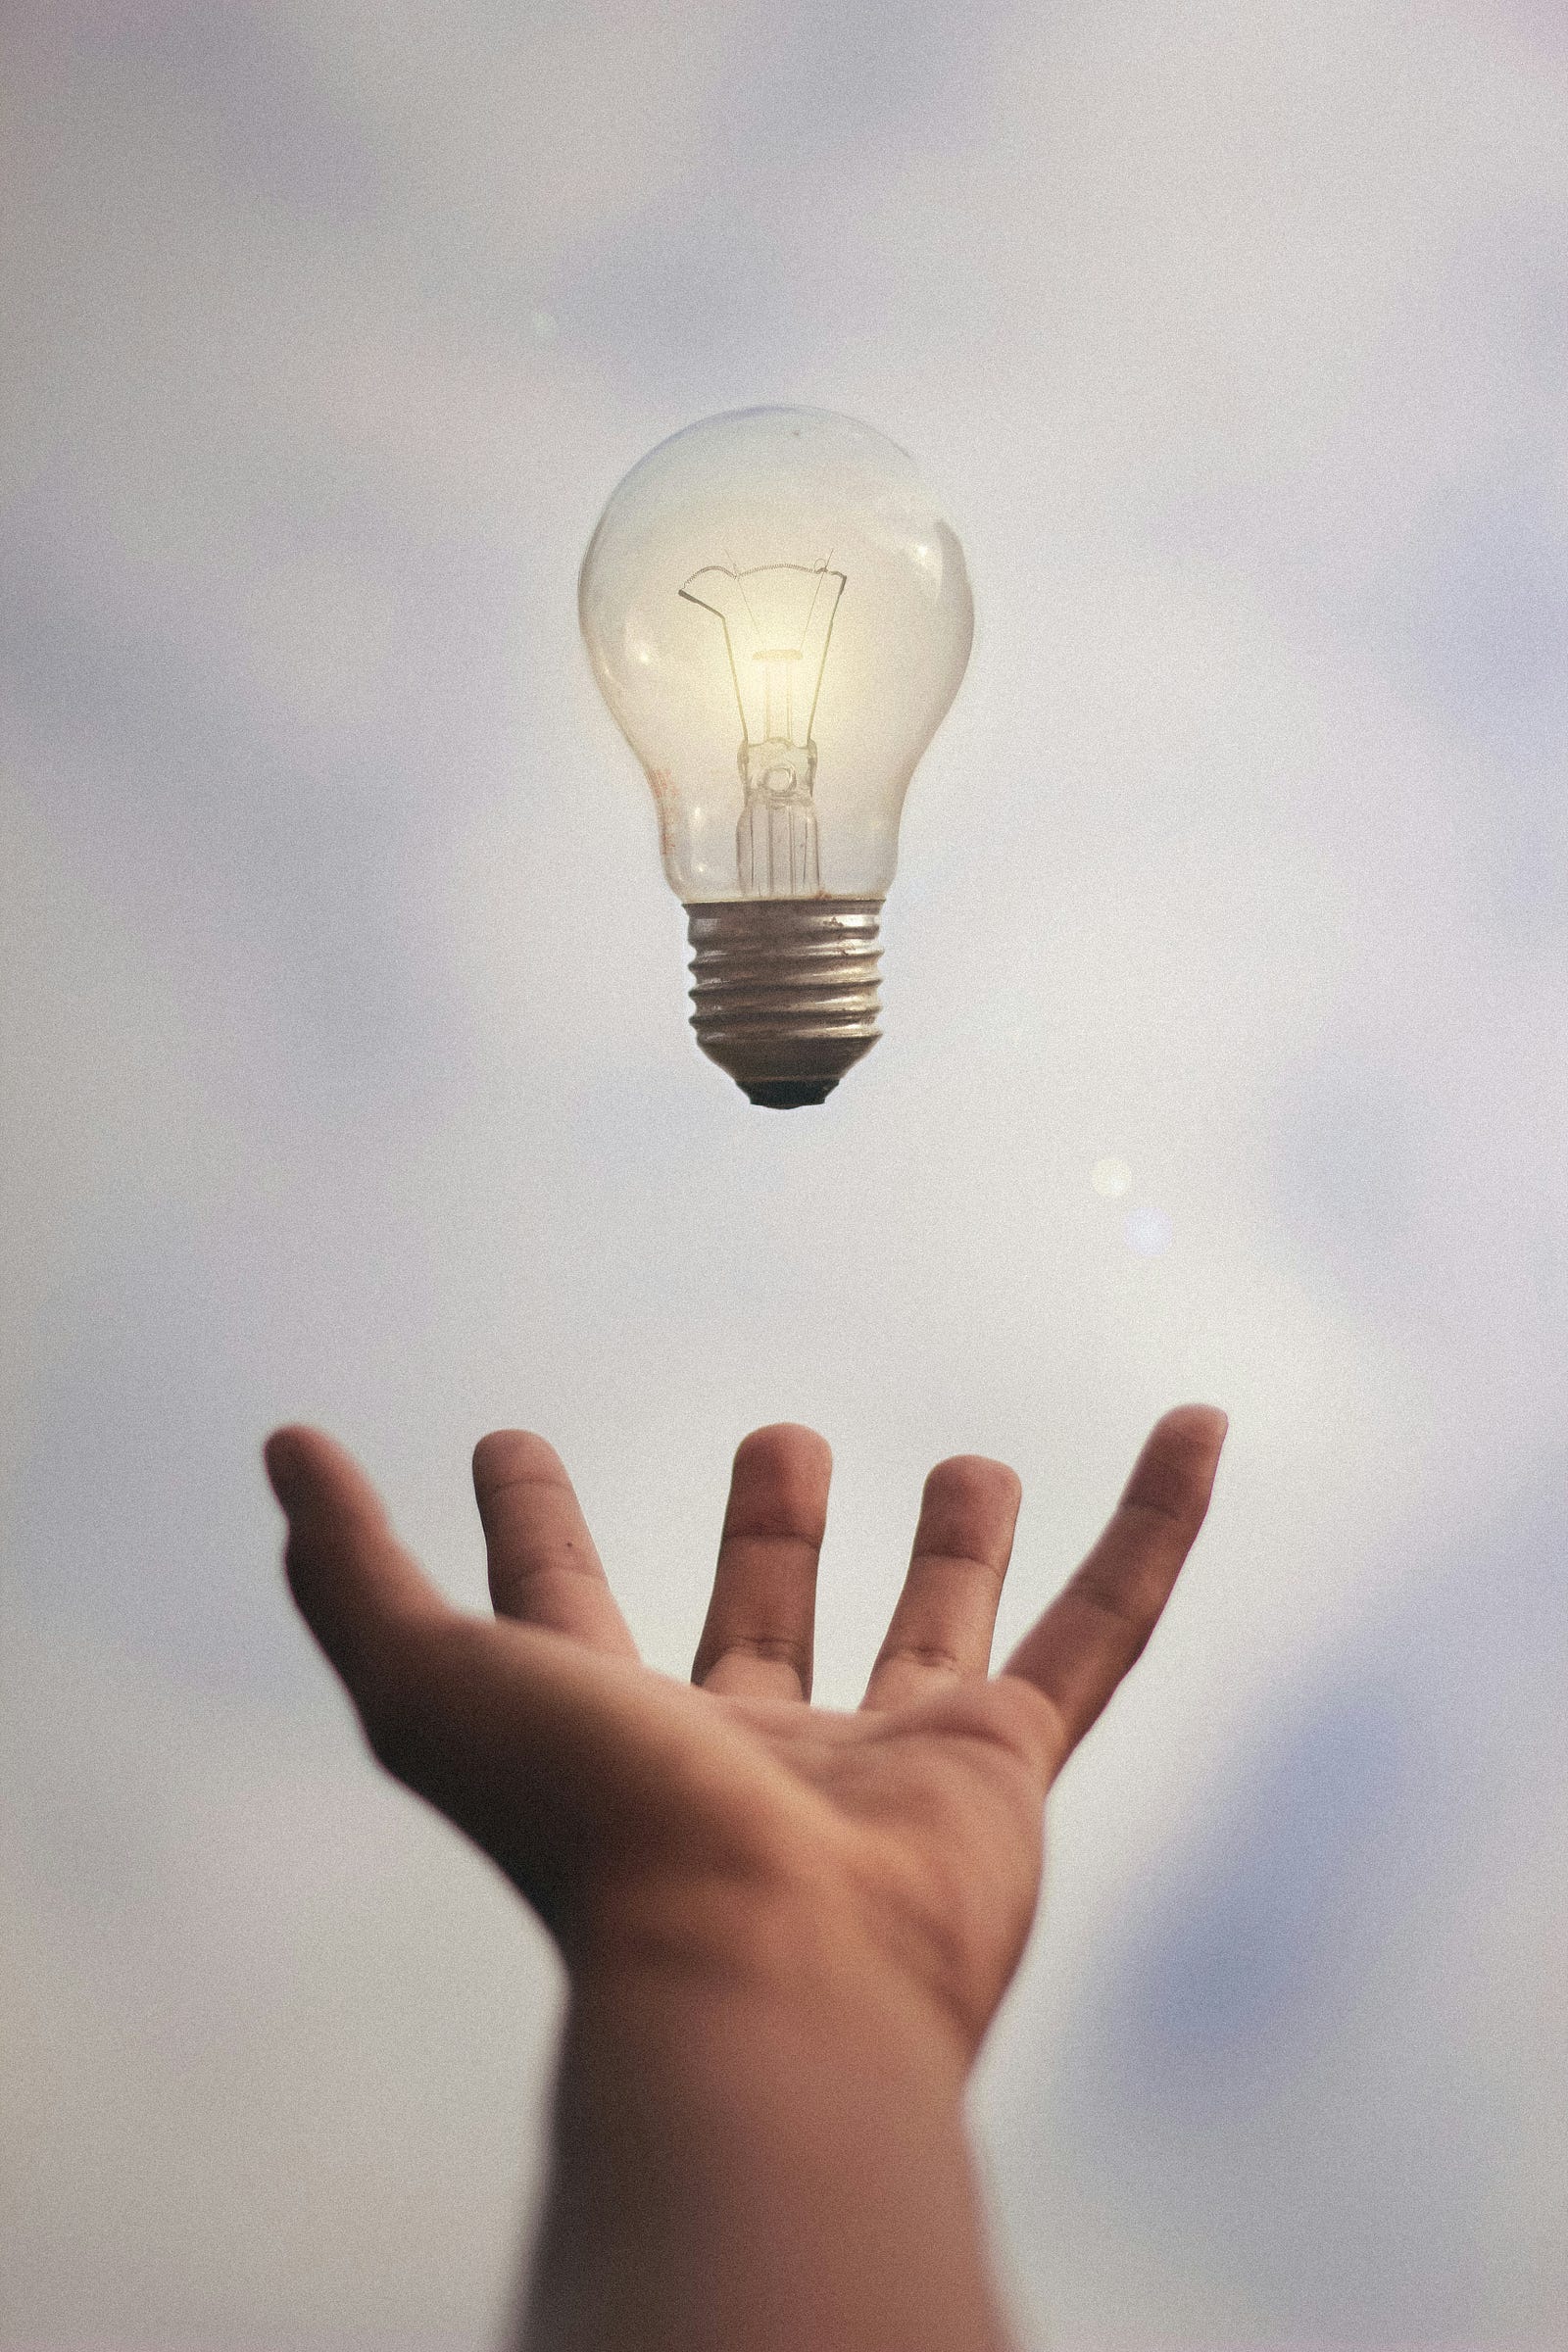 A hand throws a traditional light bulb slightly up into the air.